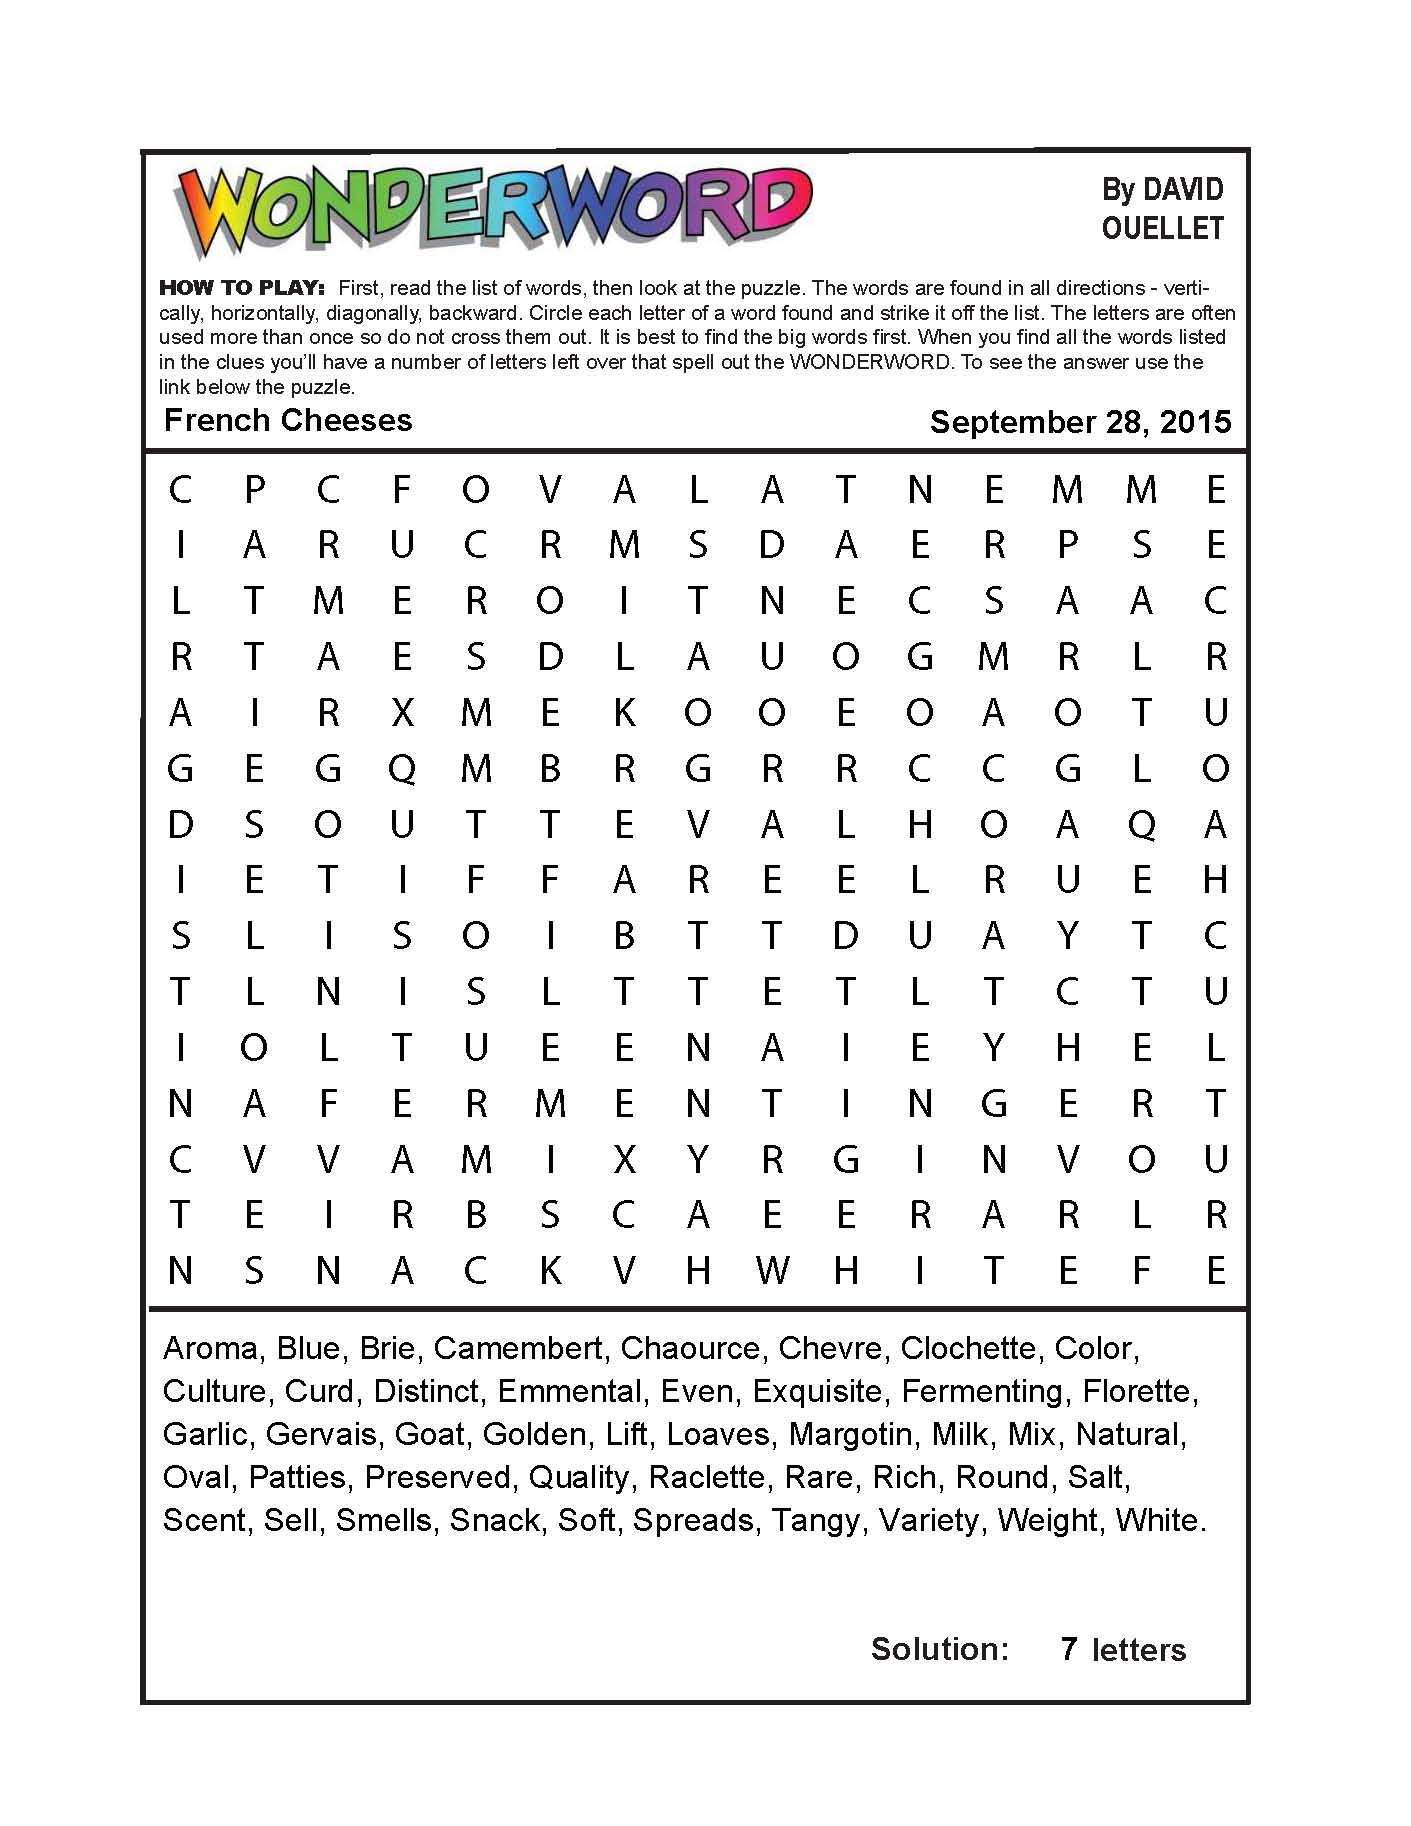 French Cheeses - Printable French Puzzle